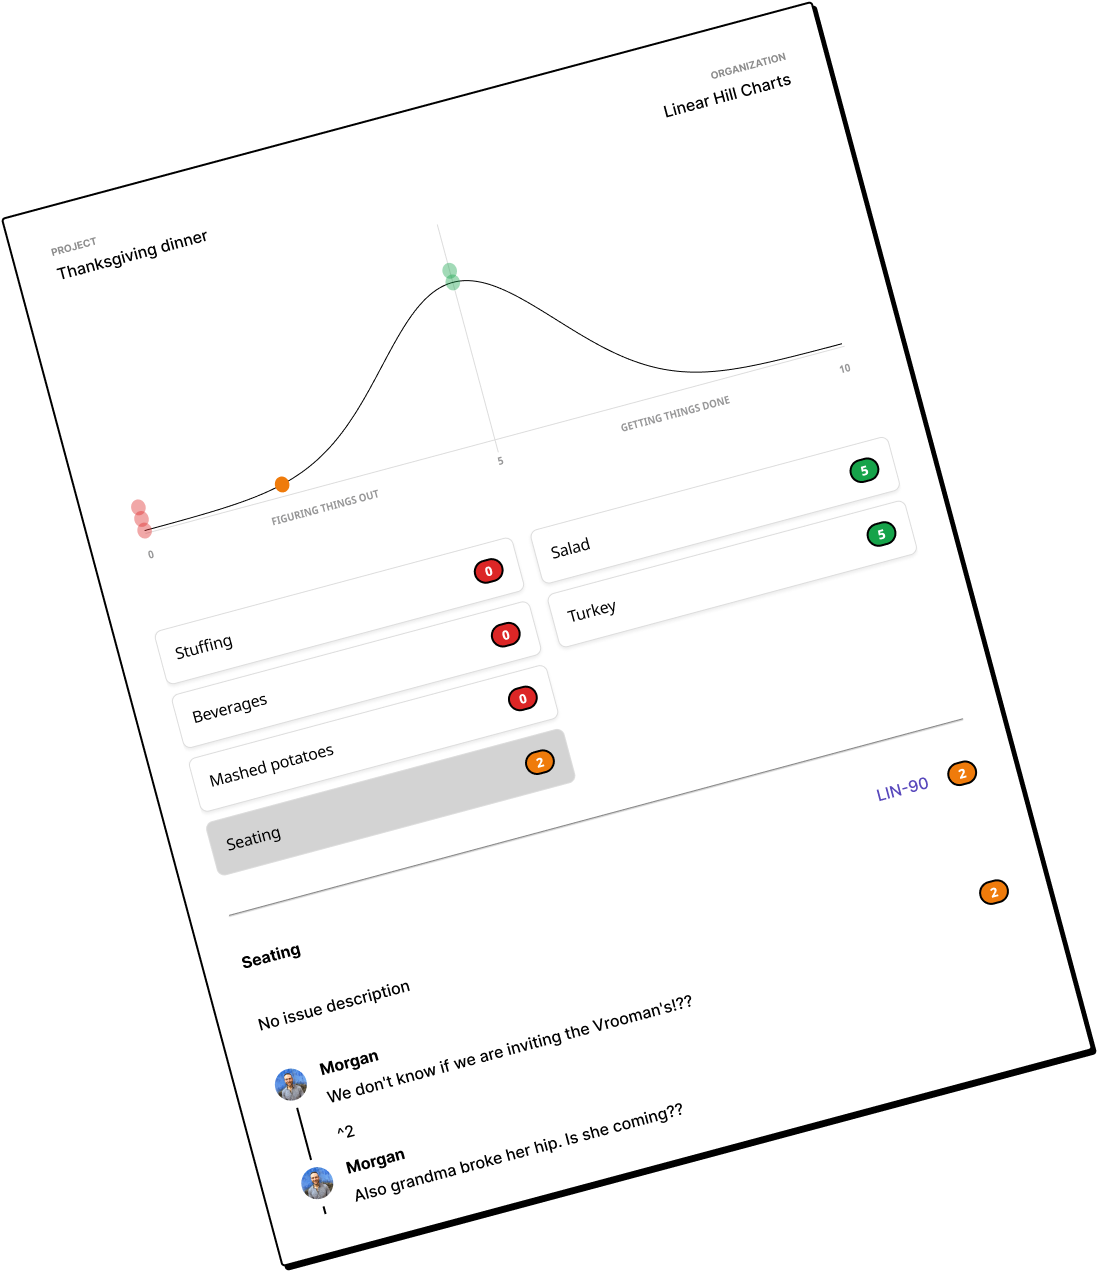 An example from the Linear Hill Charts figma widget